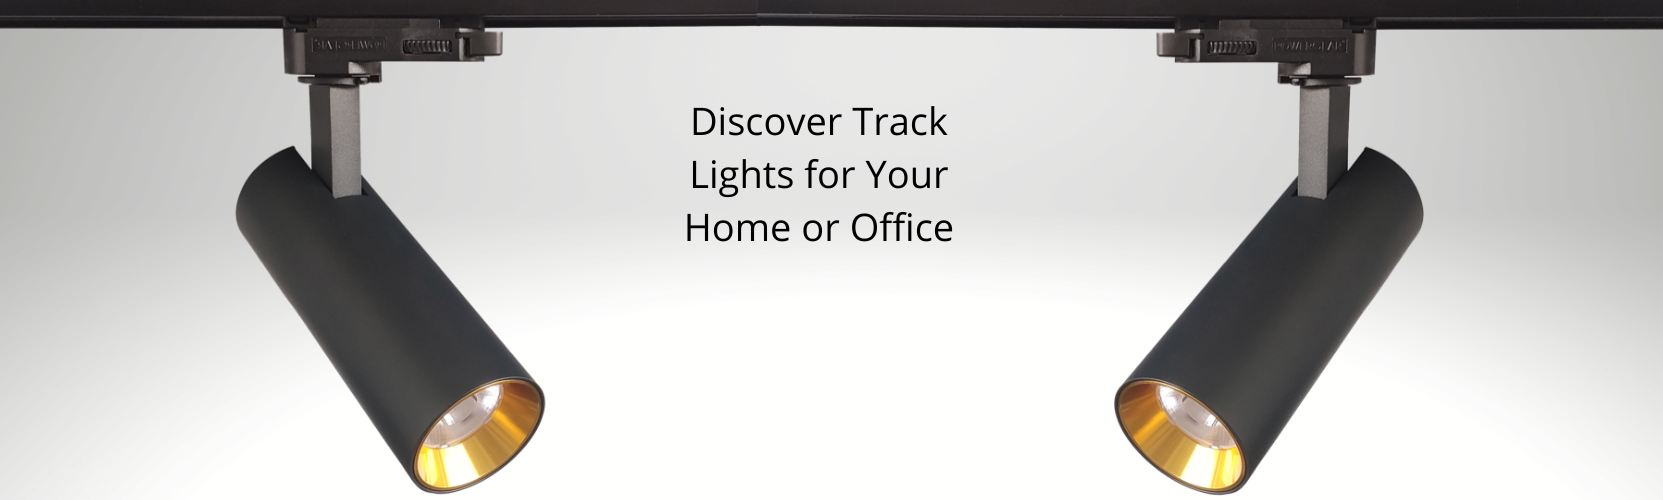 Track Lights for Your Home or Office